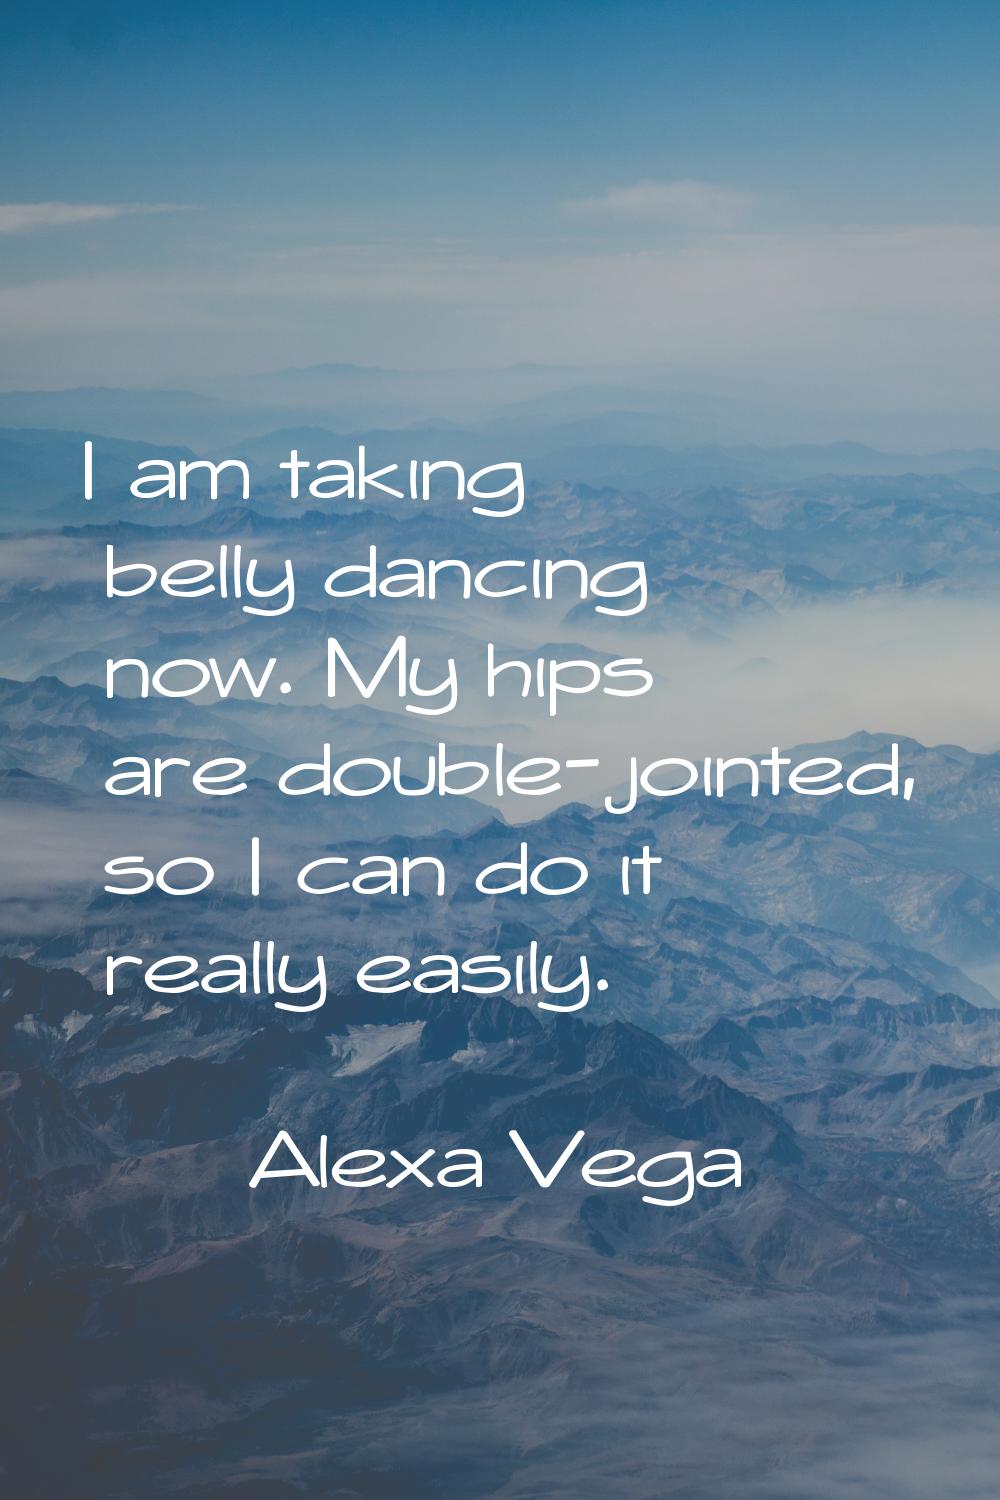 I am taking belly dancing now. My hips are double-jointed, so I can do it really easily.